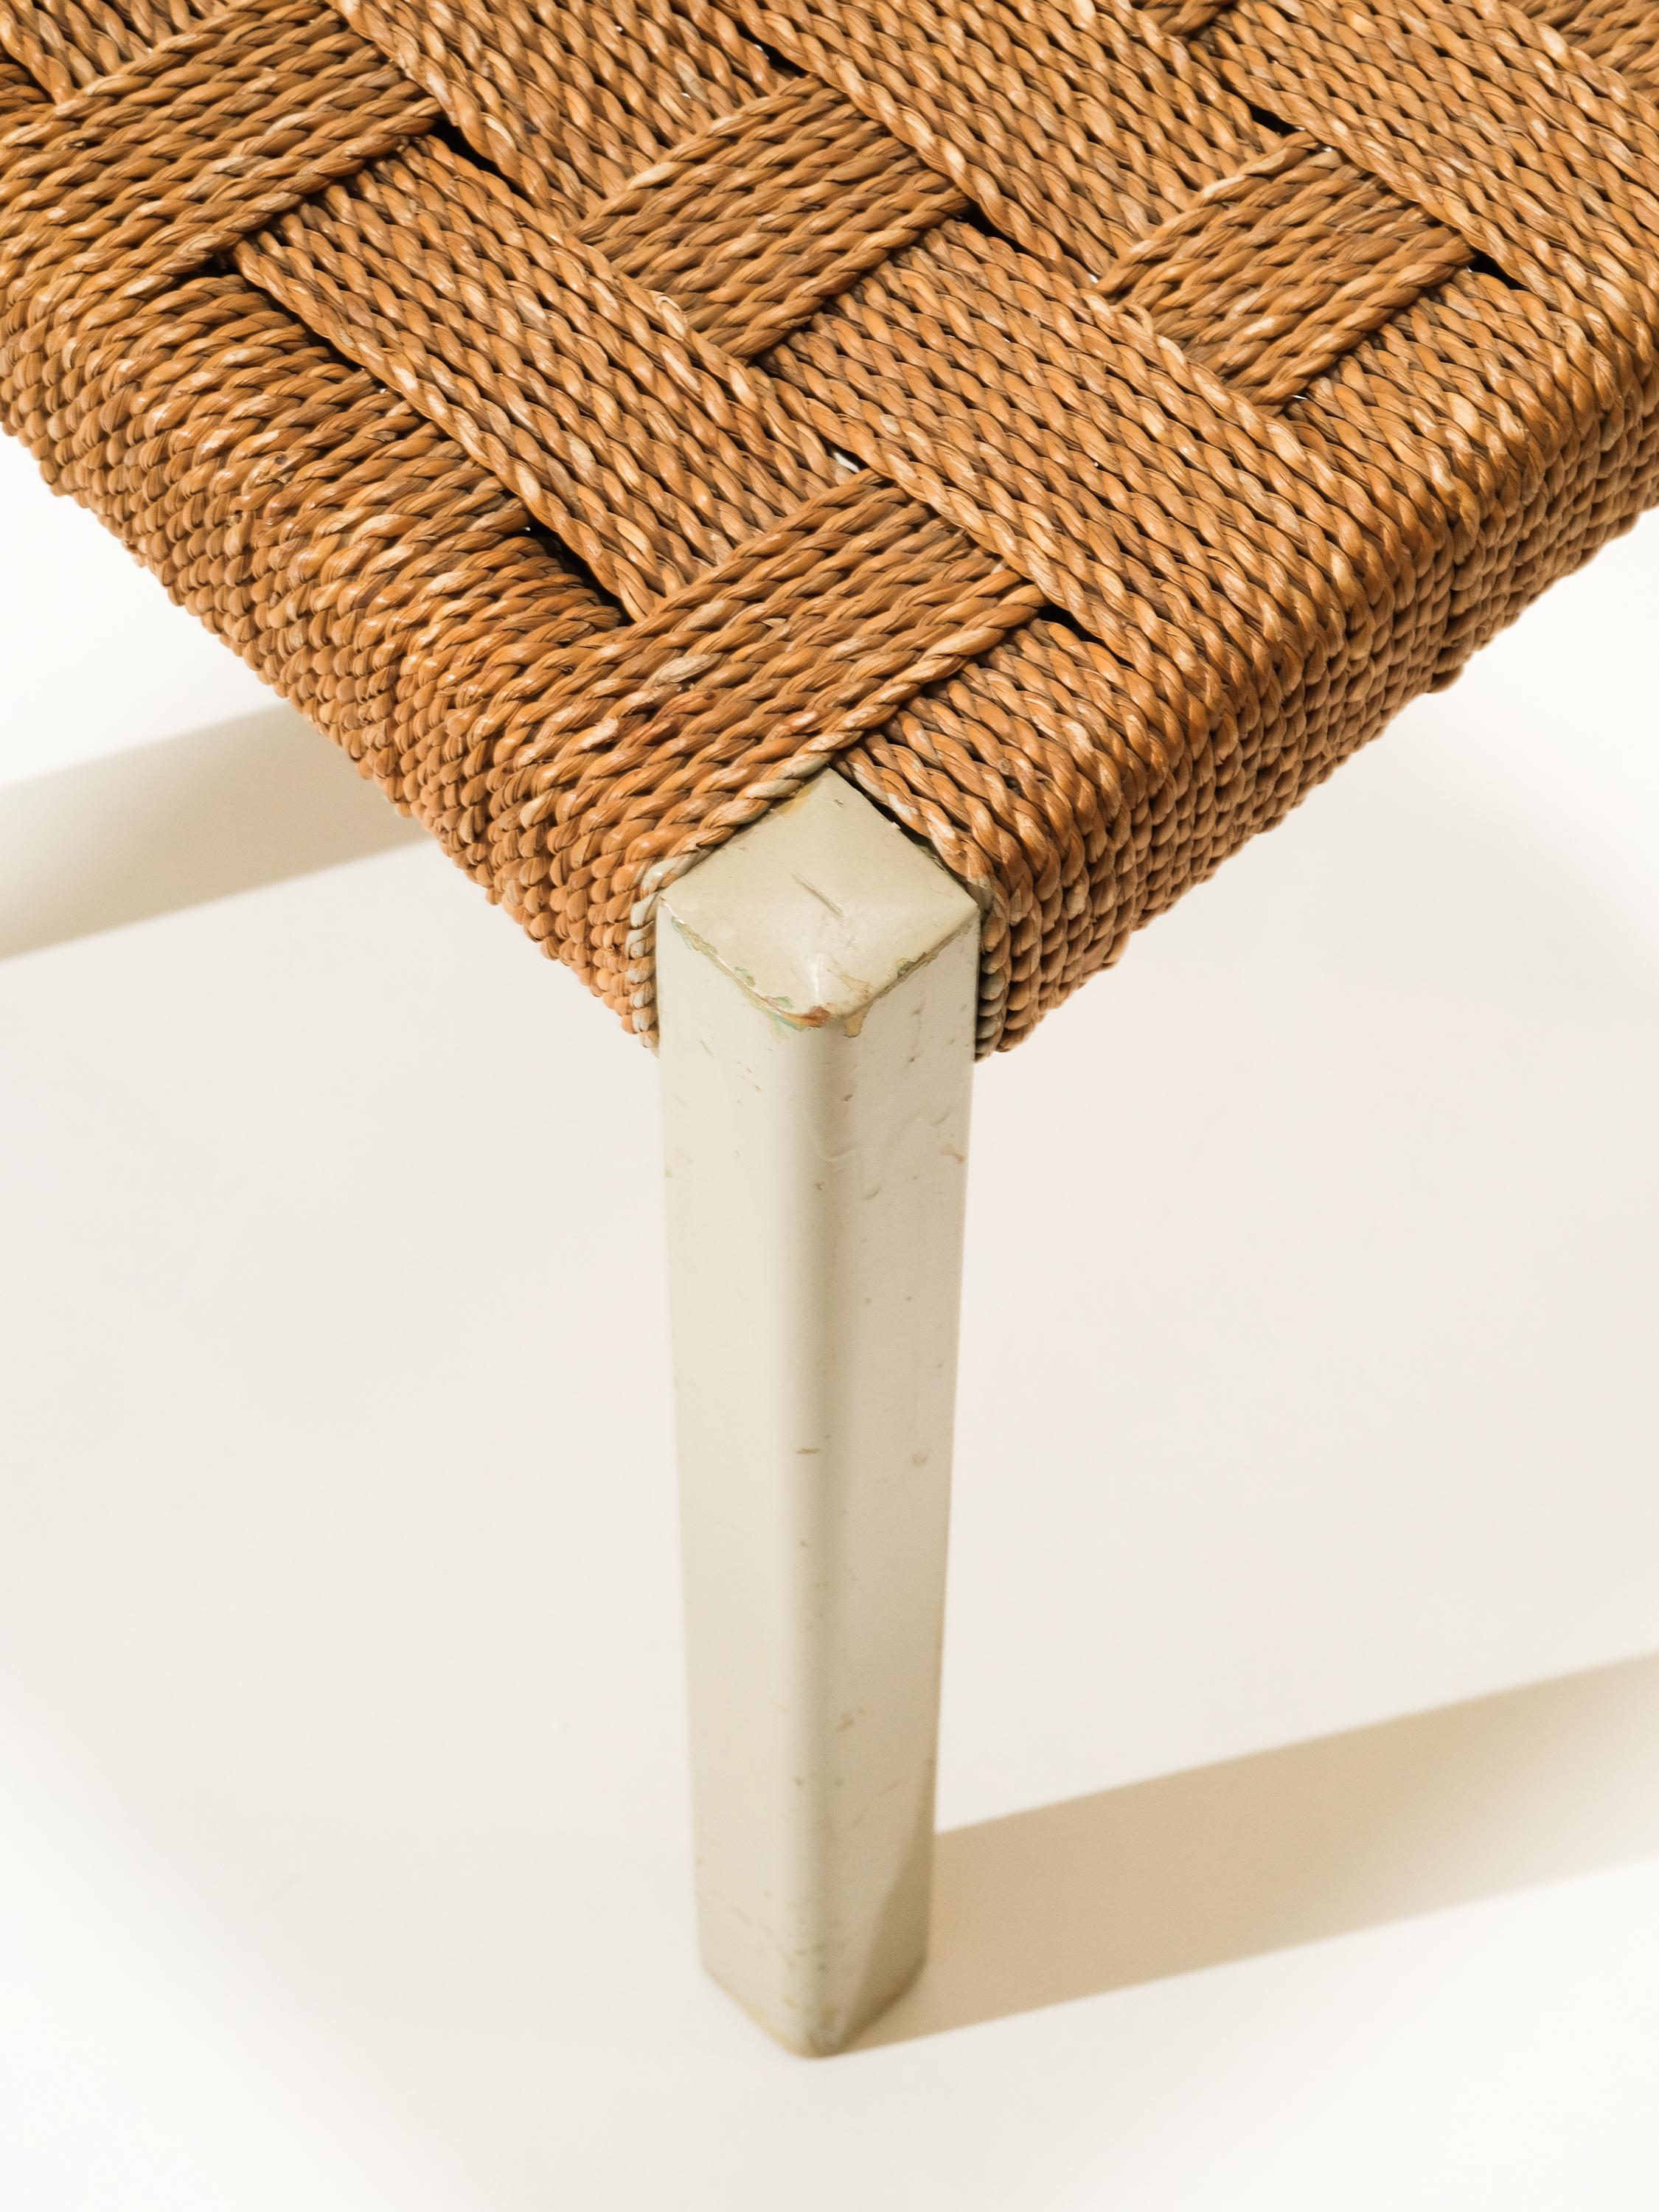 Woven Seagrass and Painted Wood Stool by Axel Larsson for Gemla, Sweden, 1940s In Good Condition For Sale In Karis, Nyland